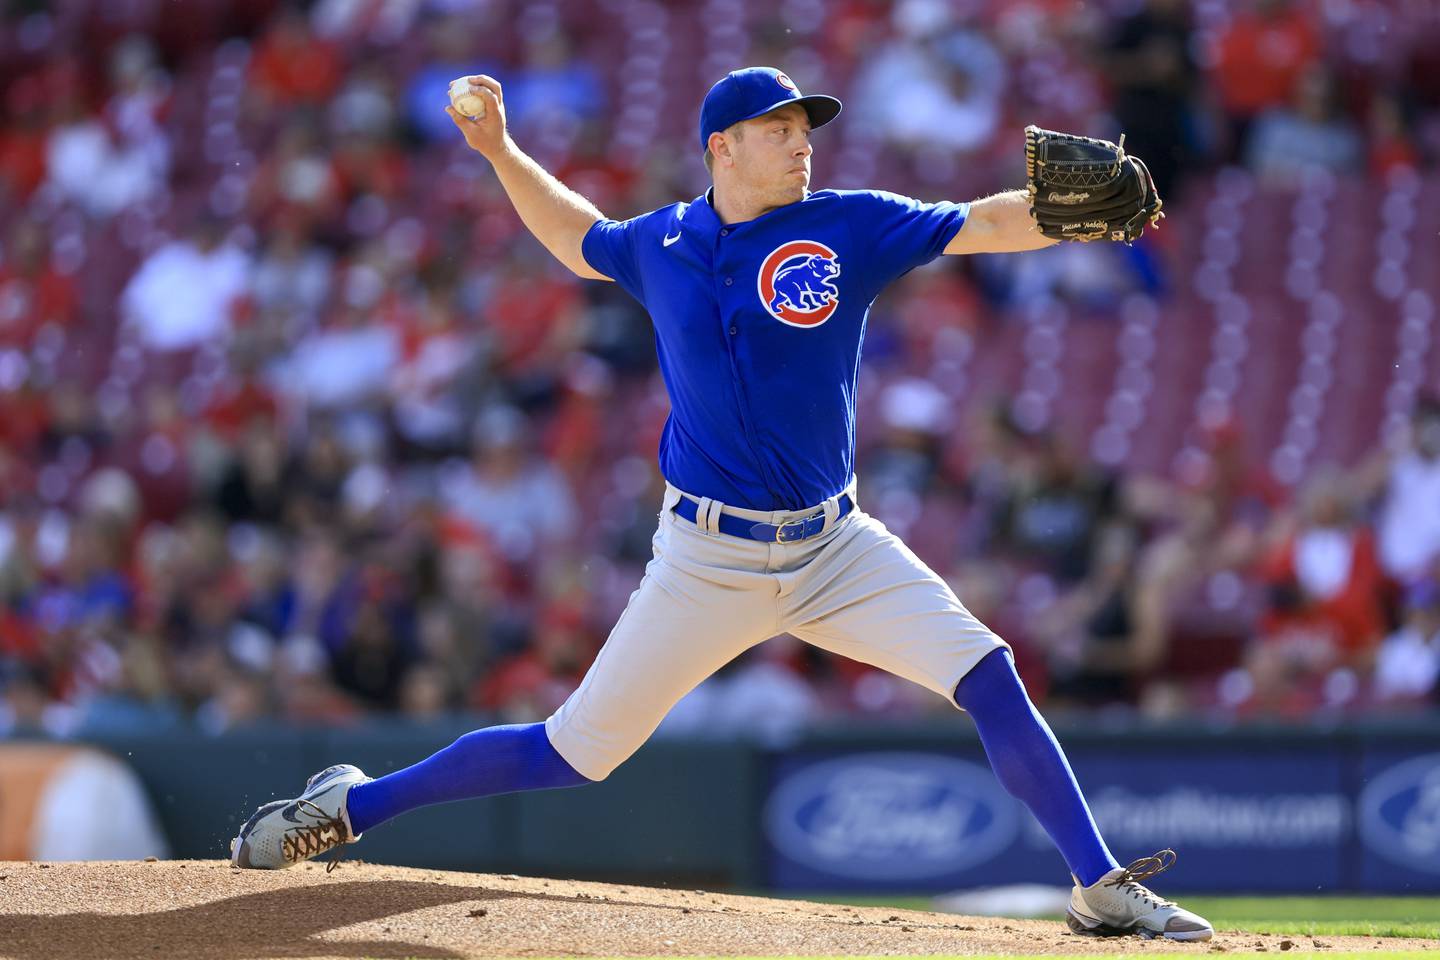 Cubs starter Adrian Sampson pitches during the first inning against the Reds on Wednesday, Oct. 5, 2022, in Cincinnati.